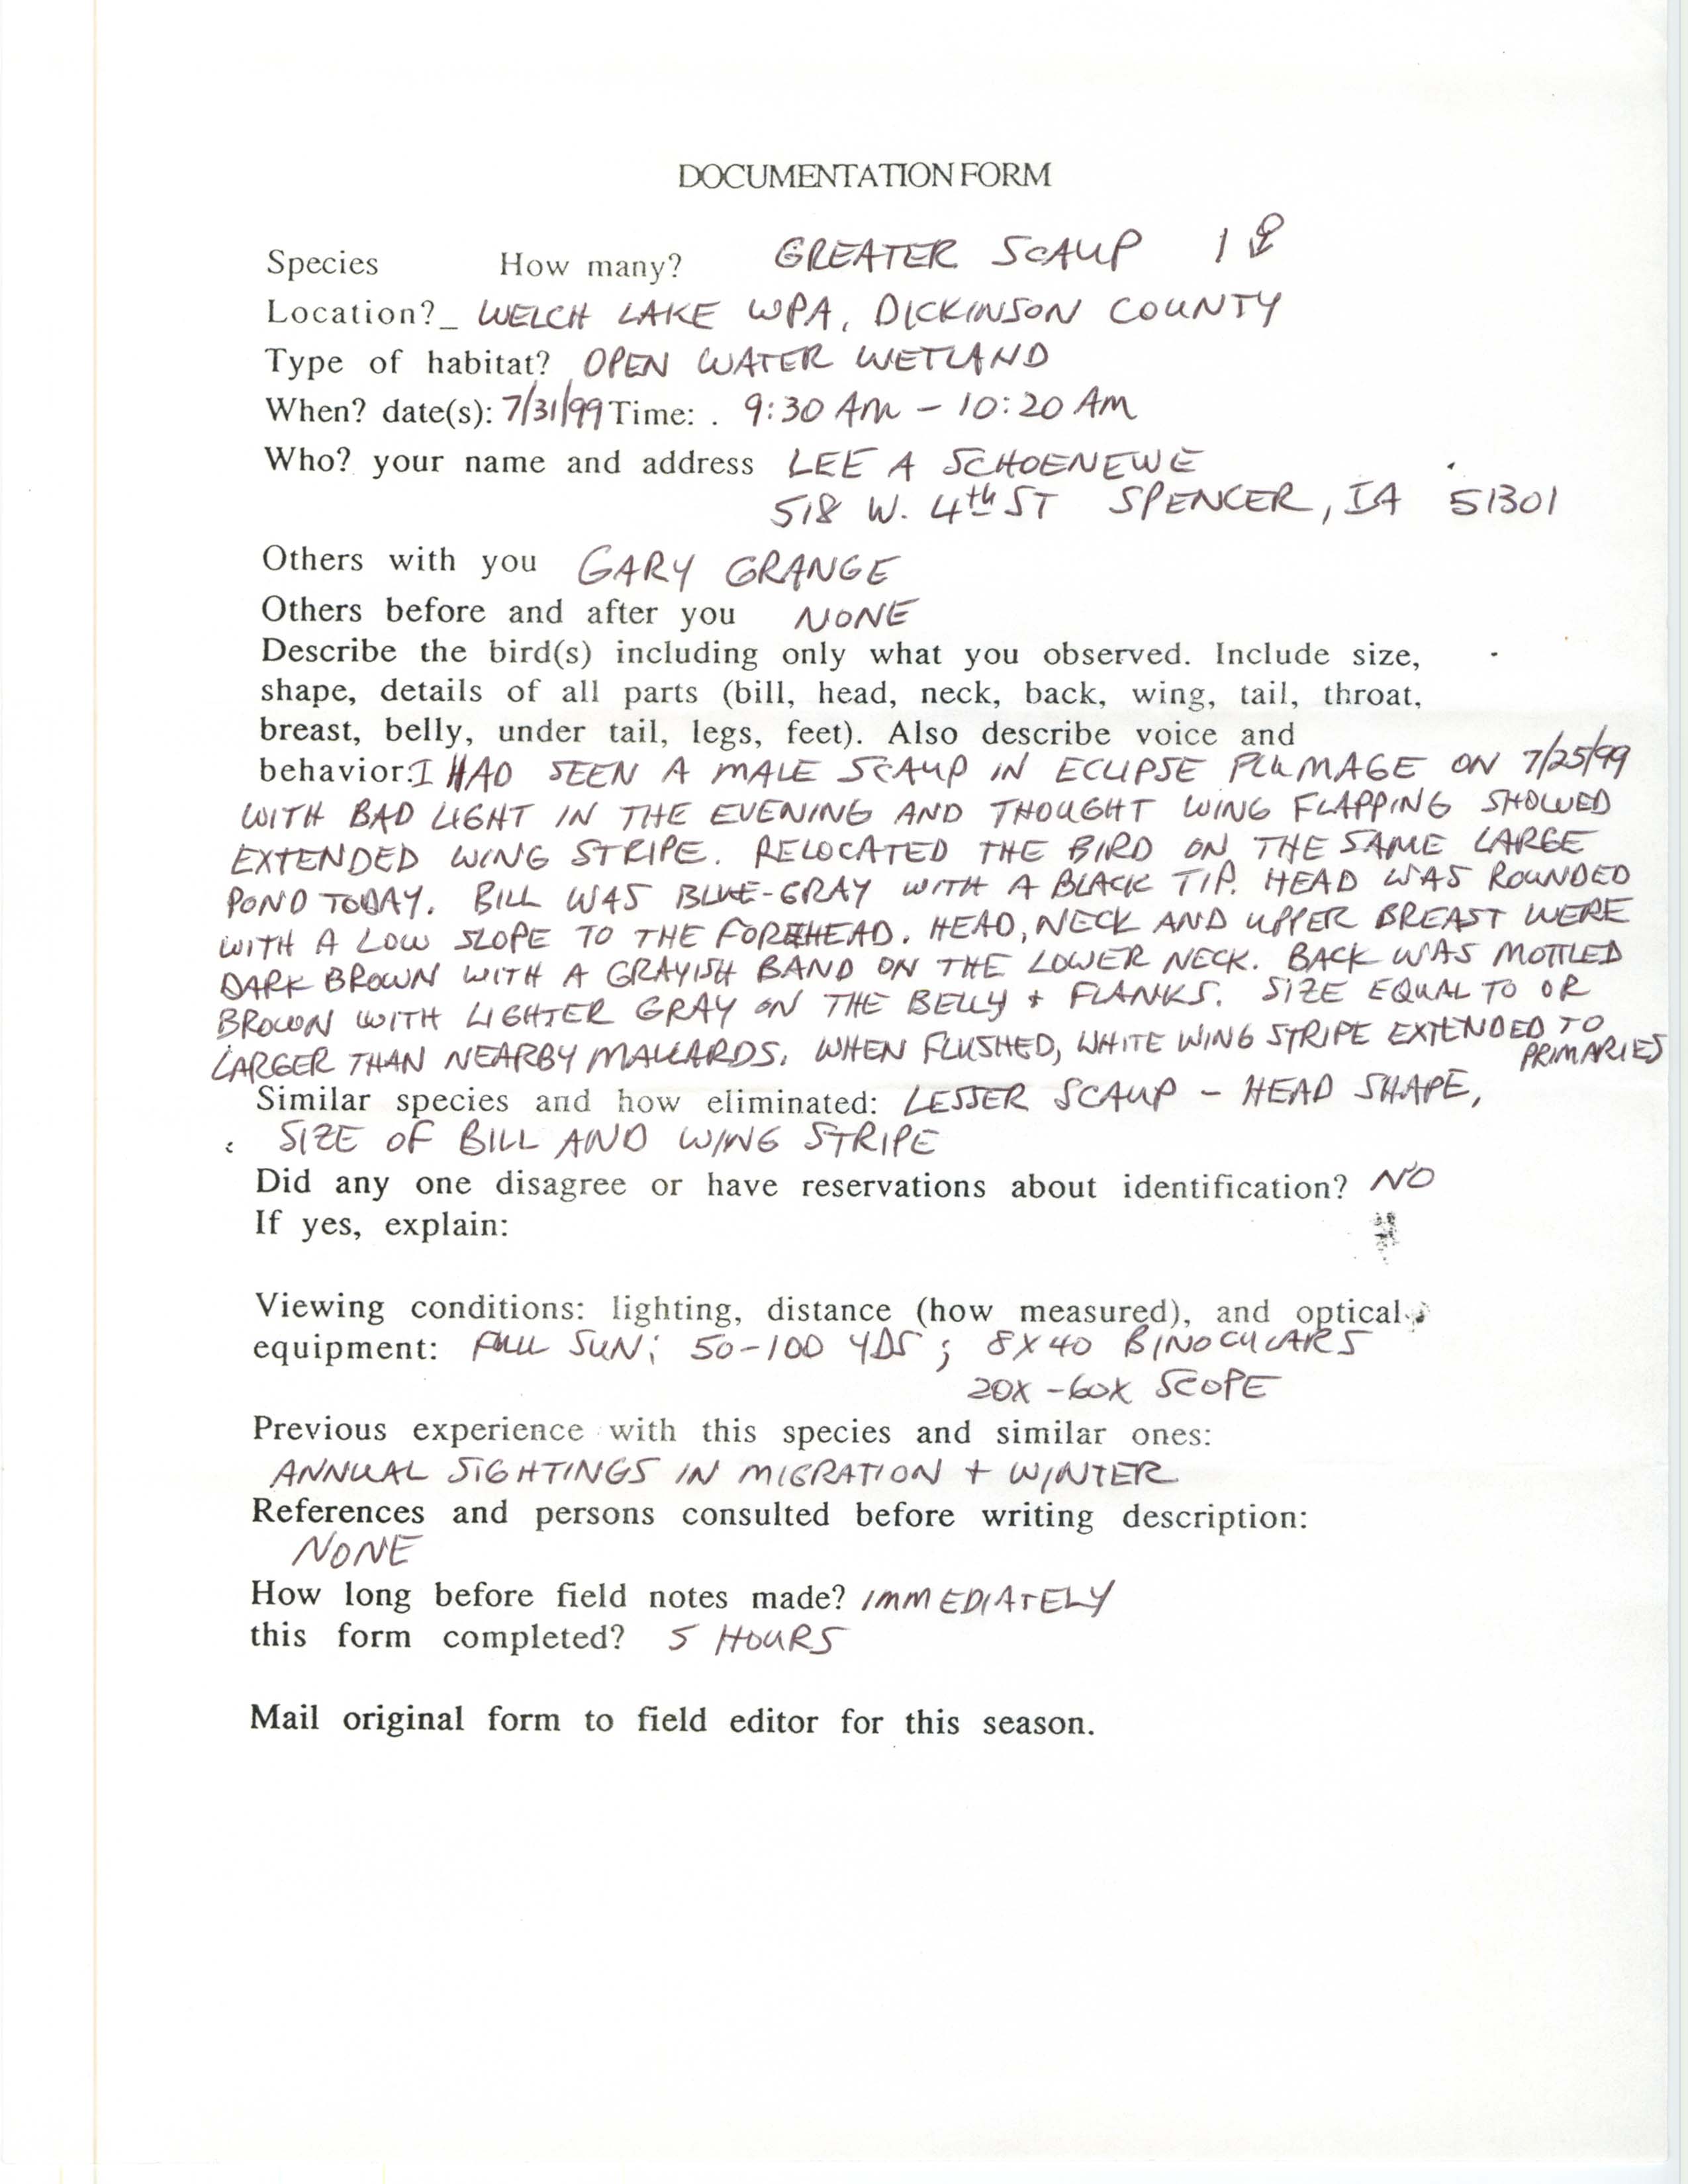 Rare bird documentation form for Greater Scaup at Welch Lake Wildlife Management Area, 1999